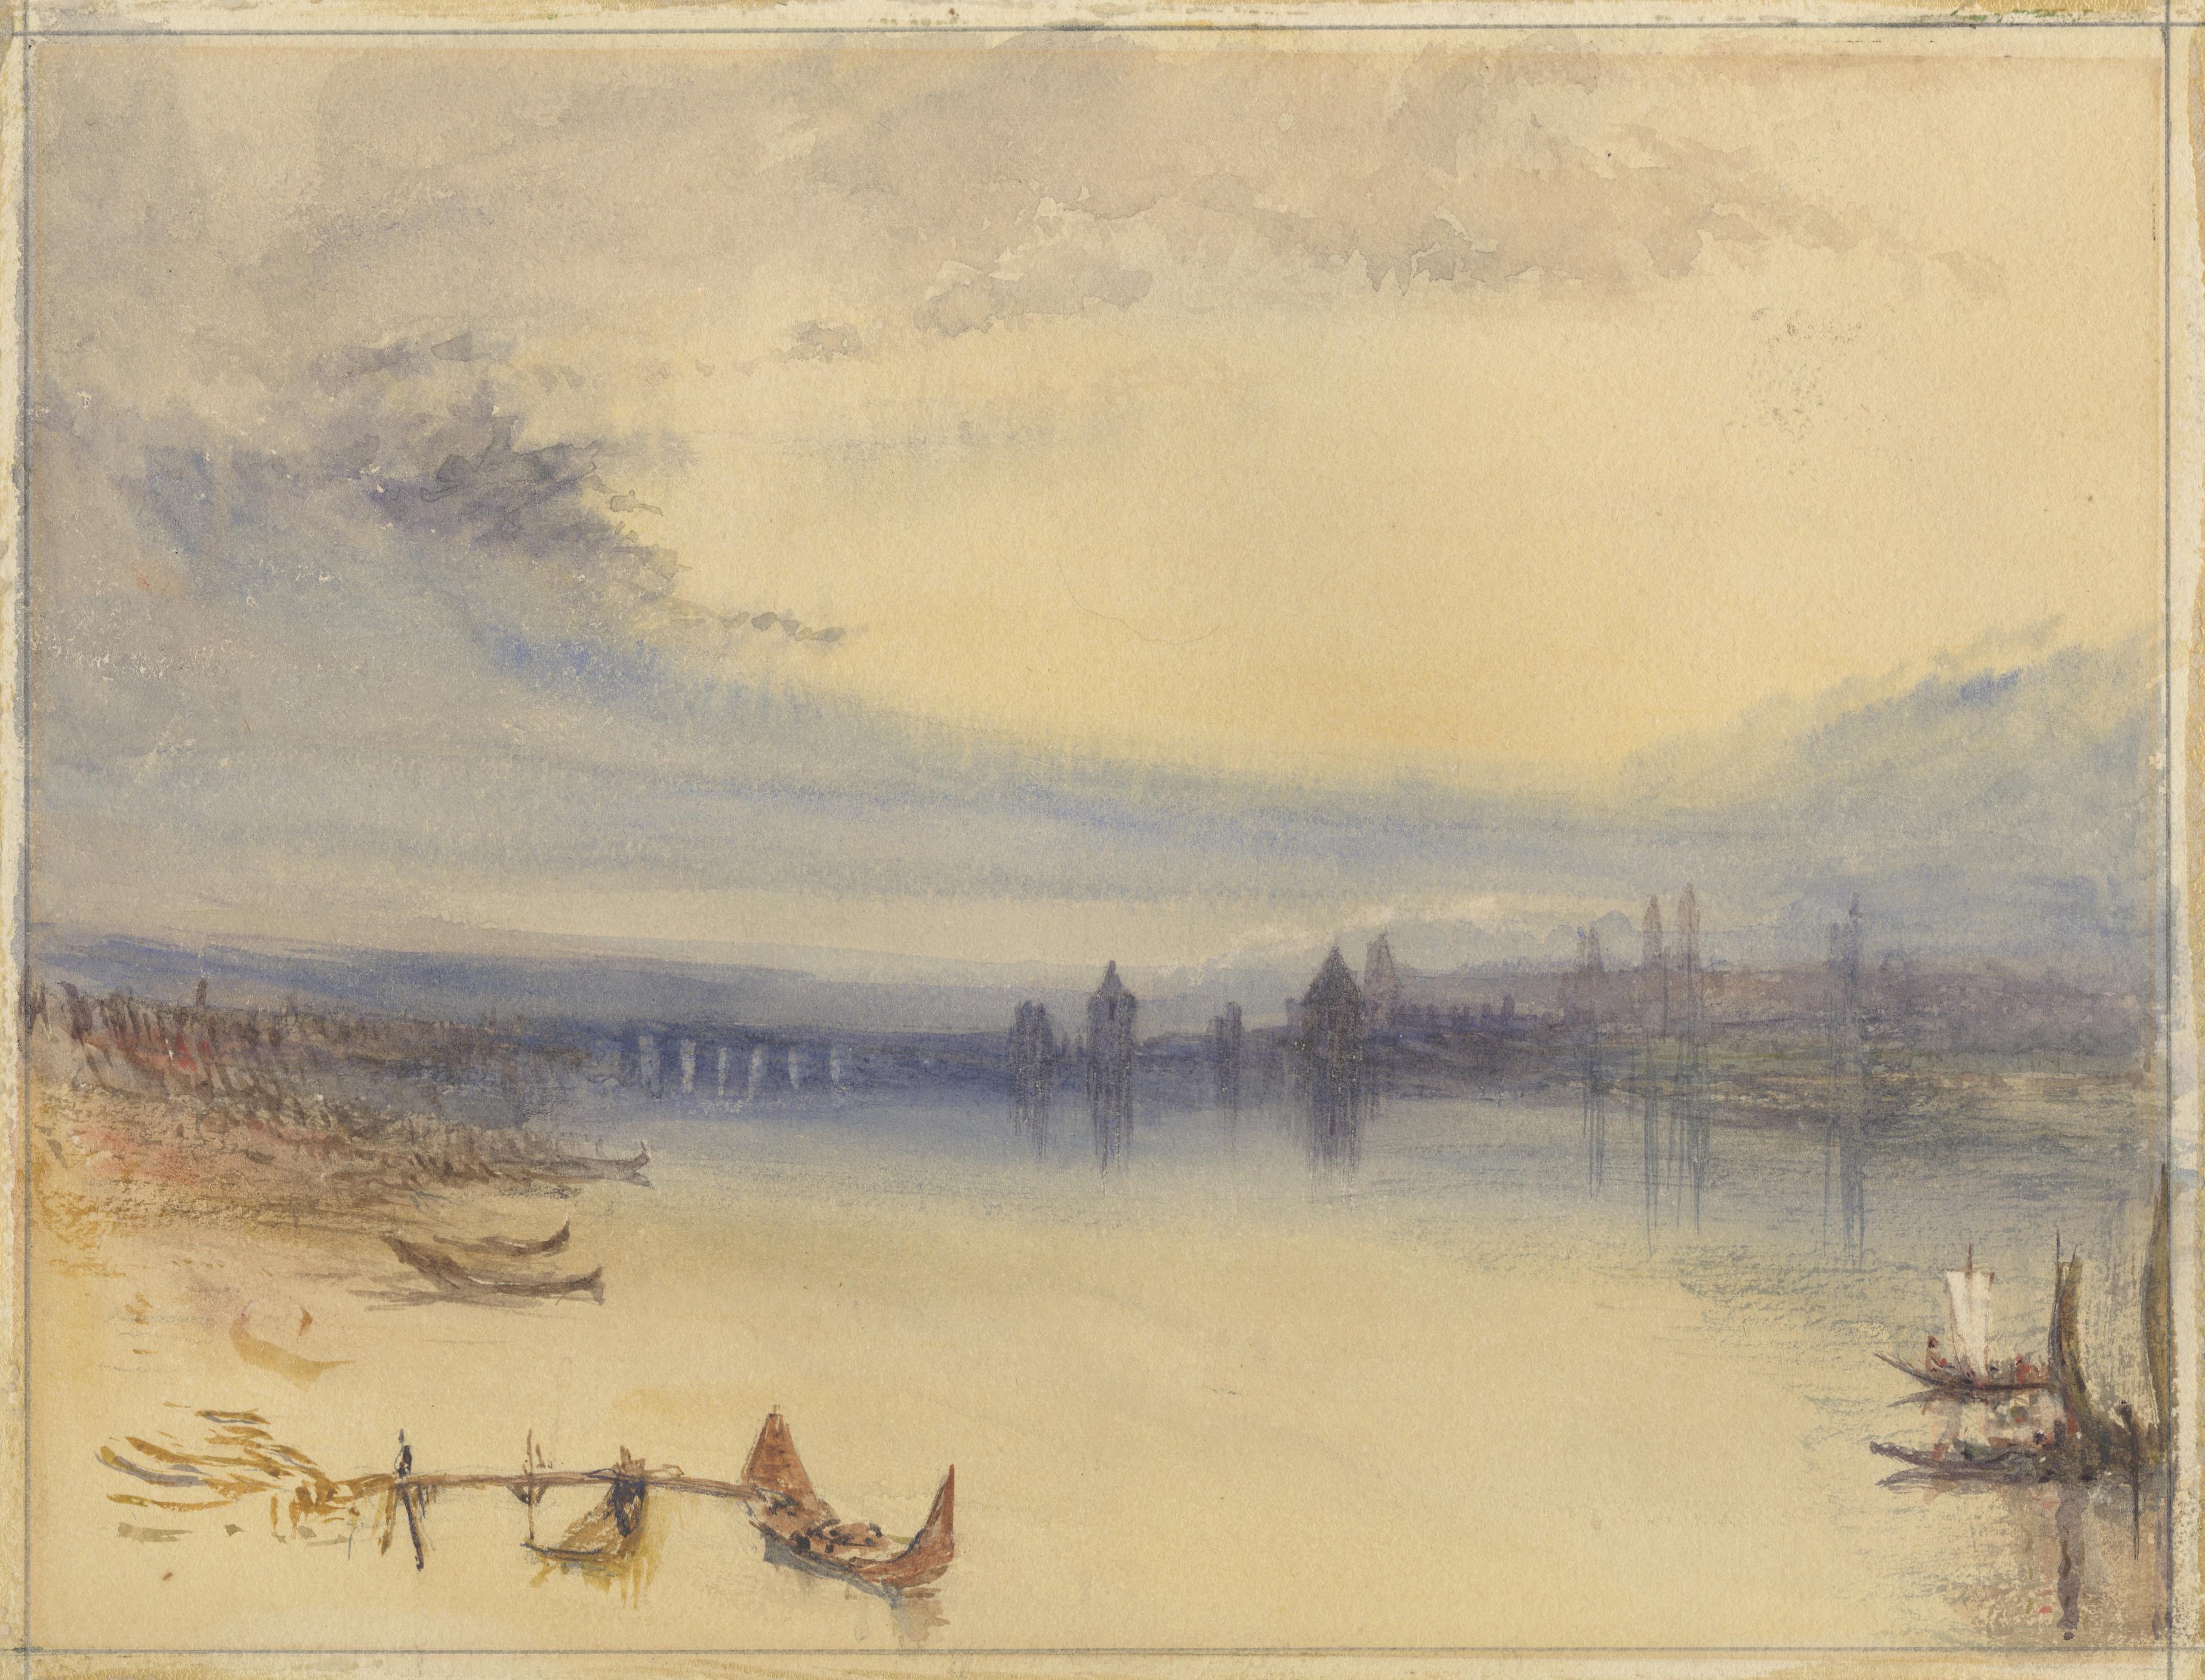 (After) Joseph Mallord William Turner Landscape Print - Lake Constance ; The Oberstadt at Bregenz with Lake Constance (the Bodensee) Bey